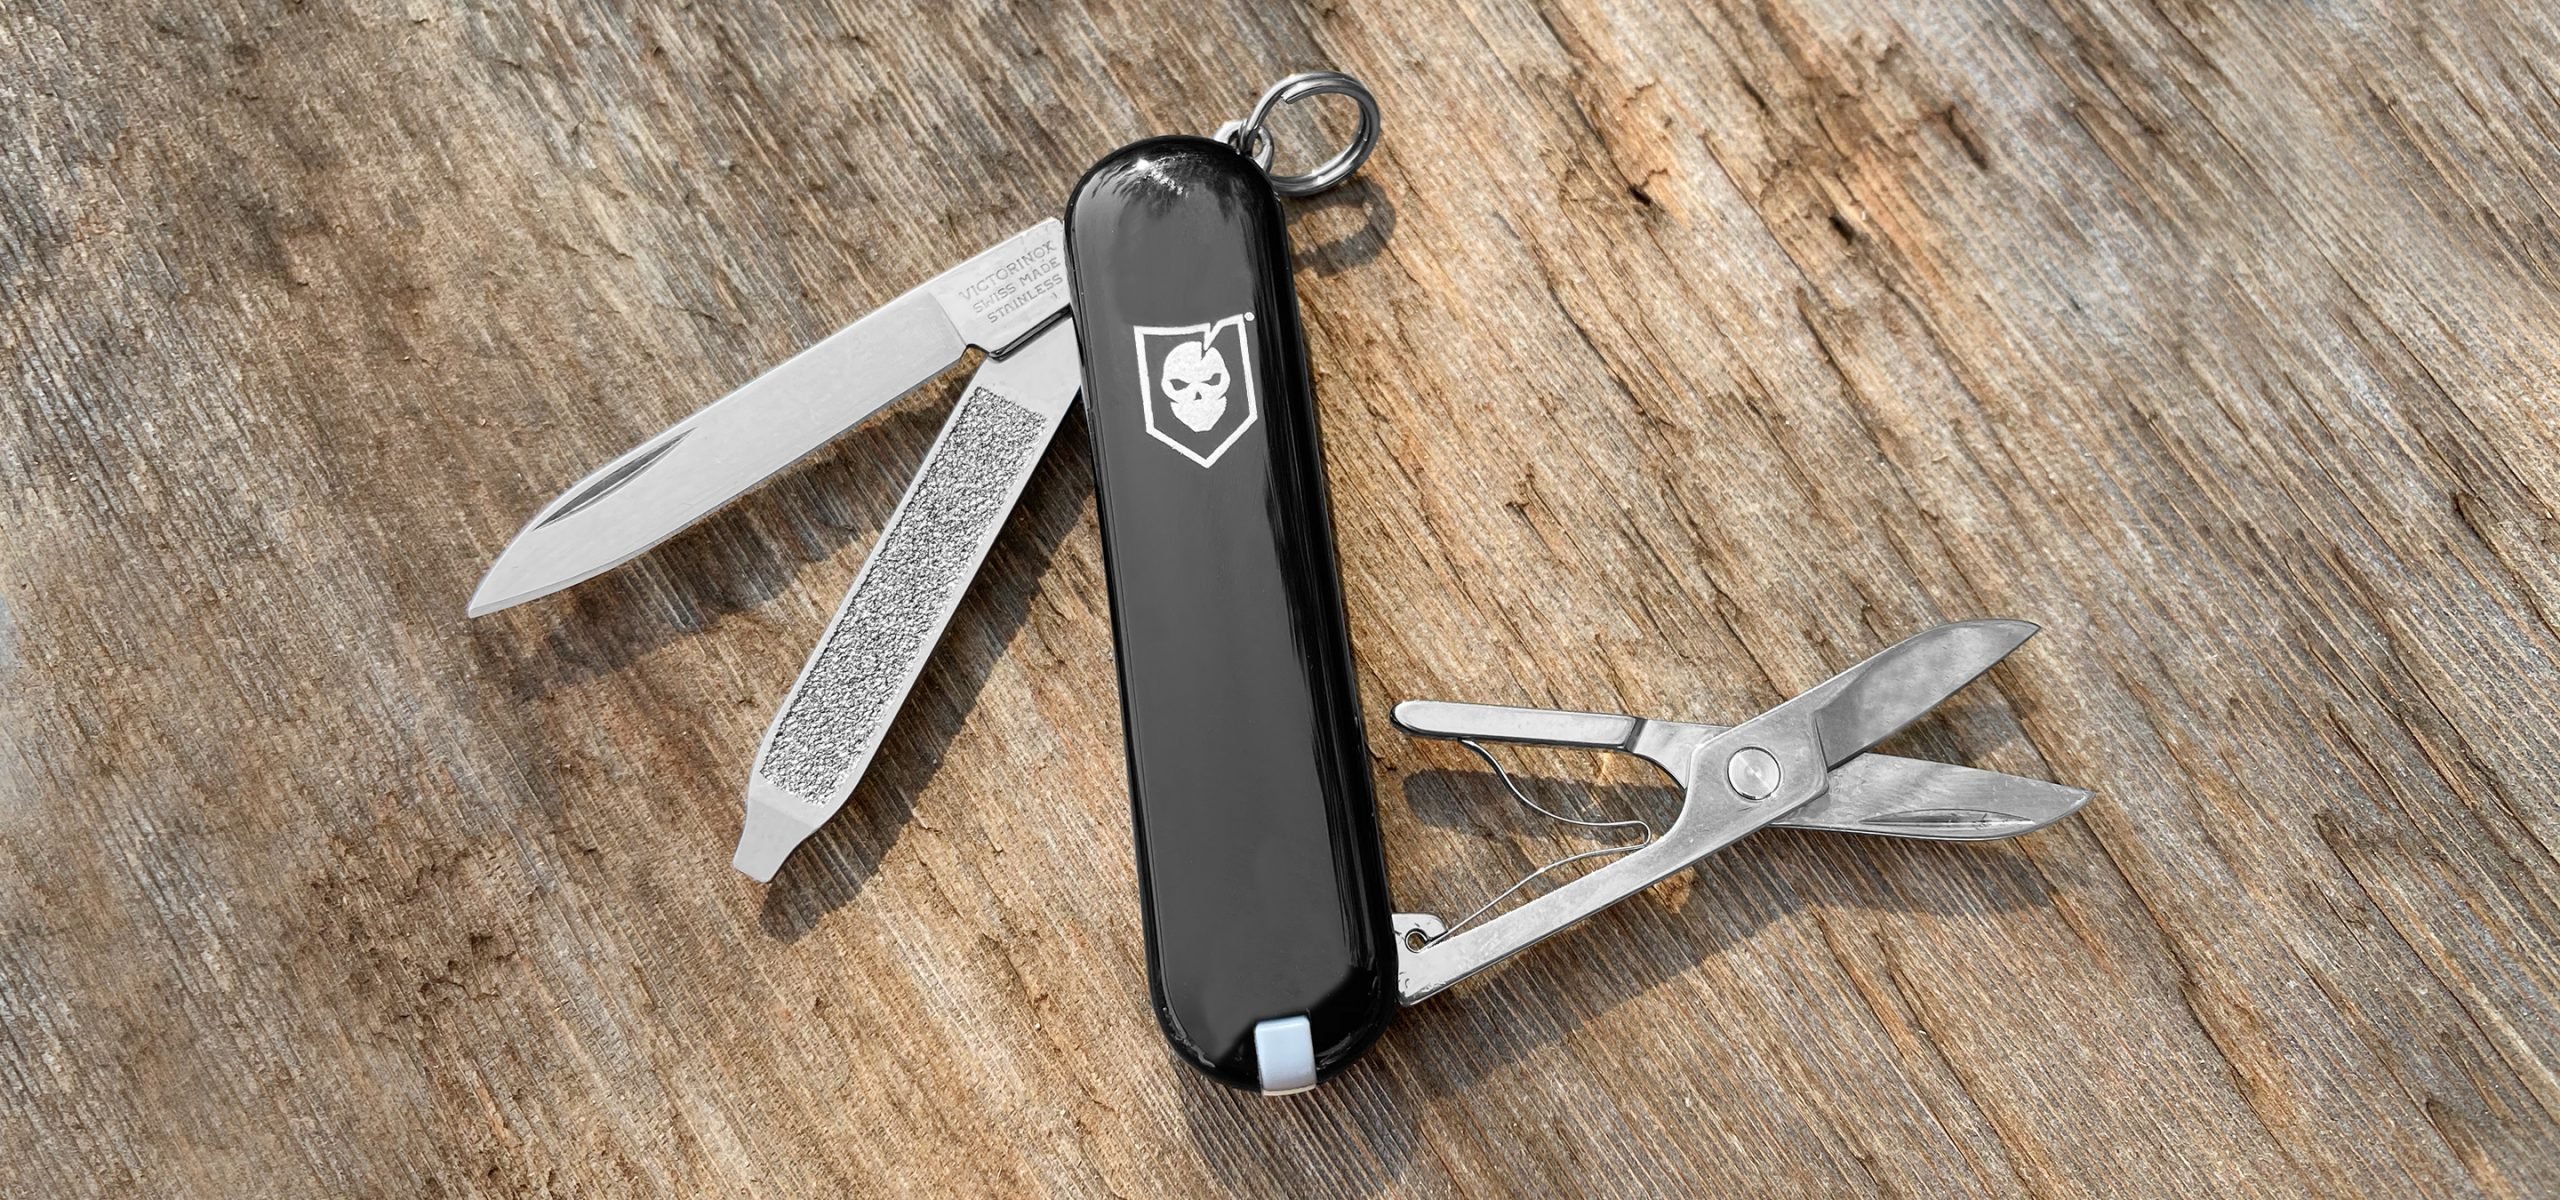 ITS EDC Swiss Army Knife Featured